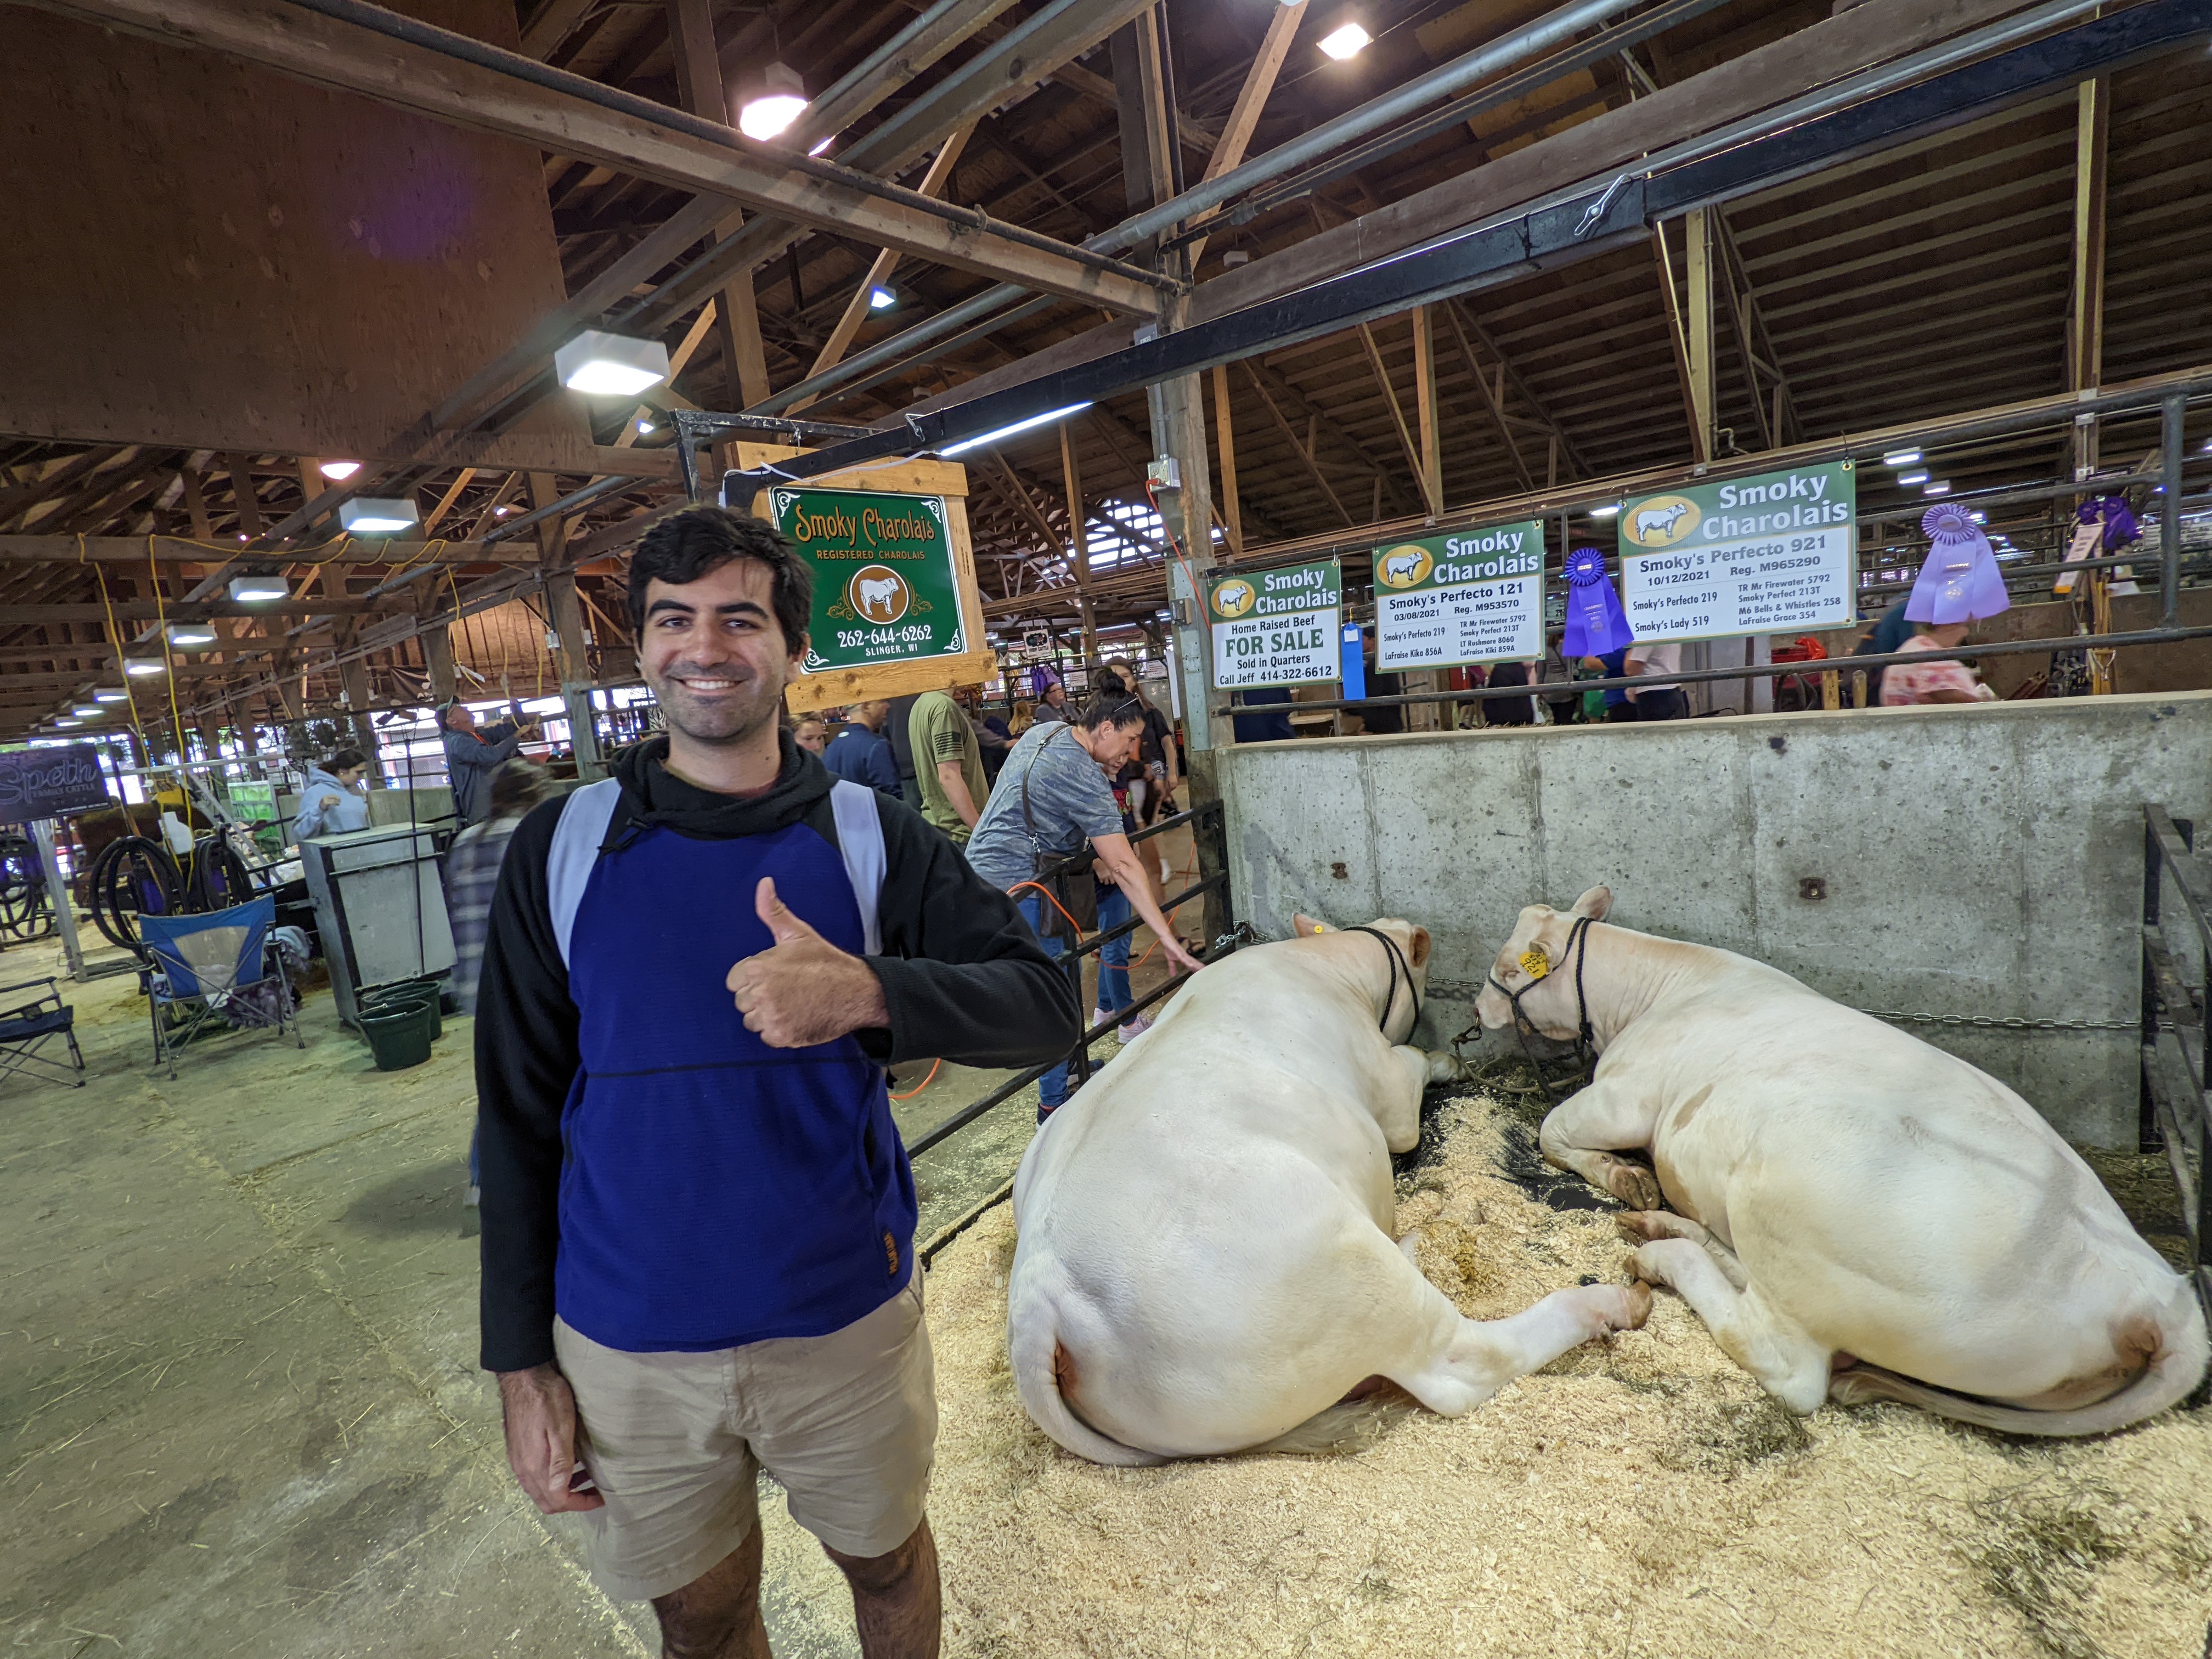 A man in a sweatshirt and shorts giving the camera a thumbs-up while standing in front of two white cows that are facing away from him. The cows have ribbons on their enclosure indiciating their status as state fair champions.